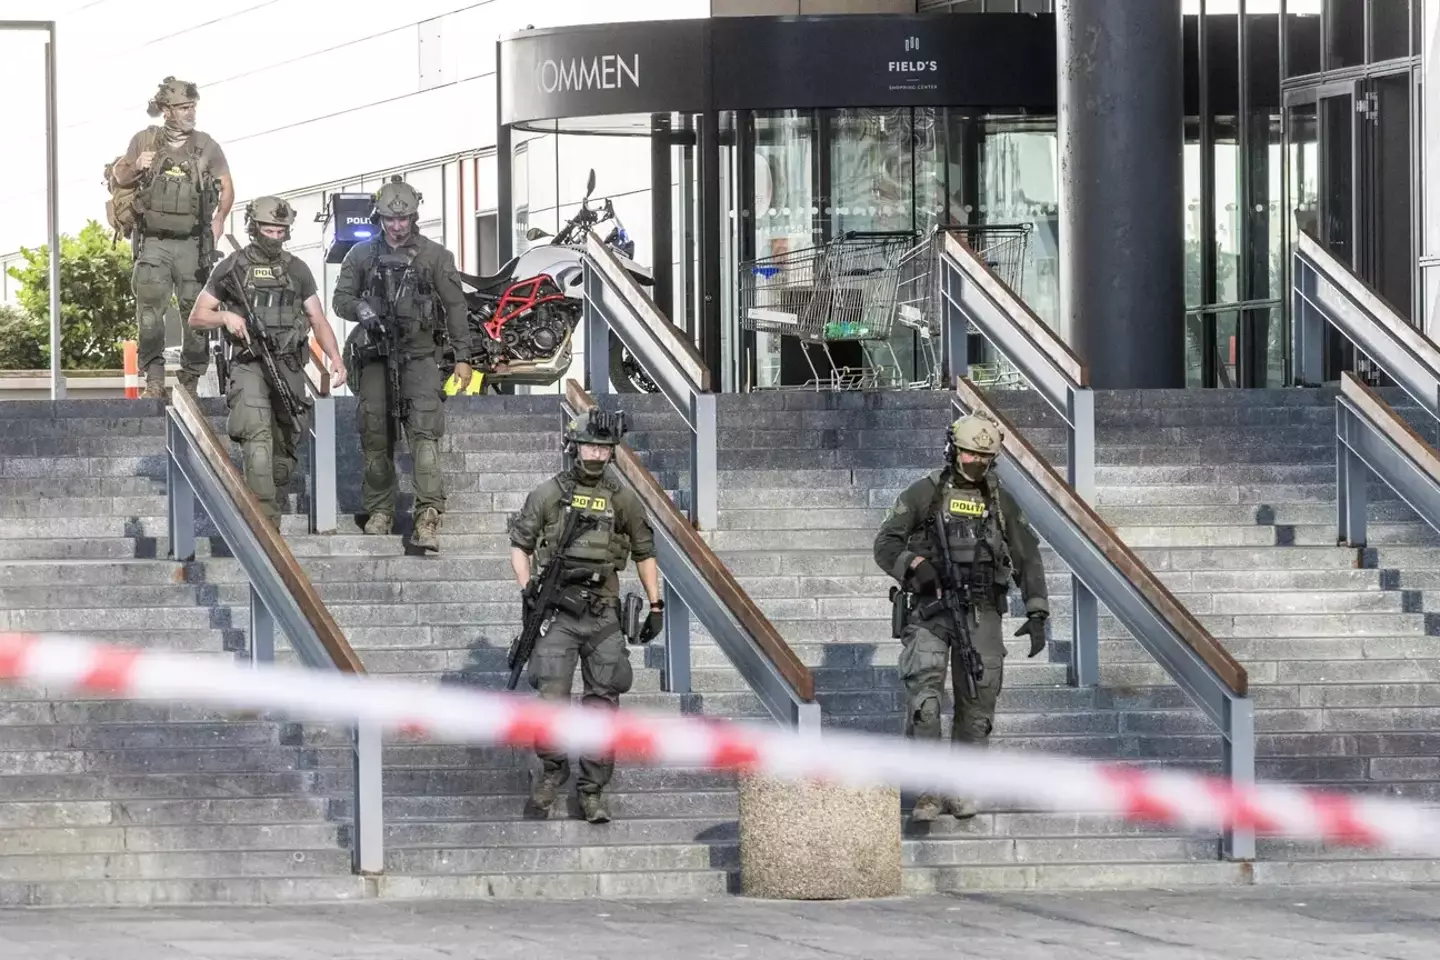 Danish police arrested suspected shooter near the mall 13 minutes after being alerted.